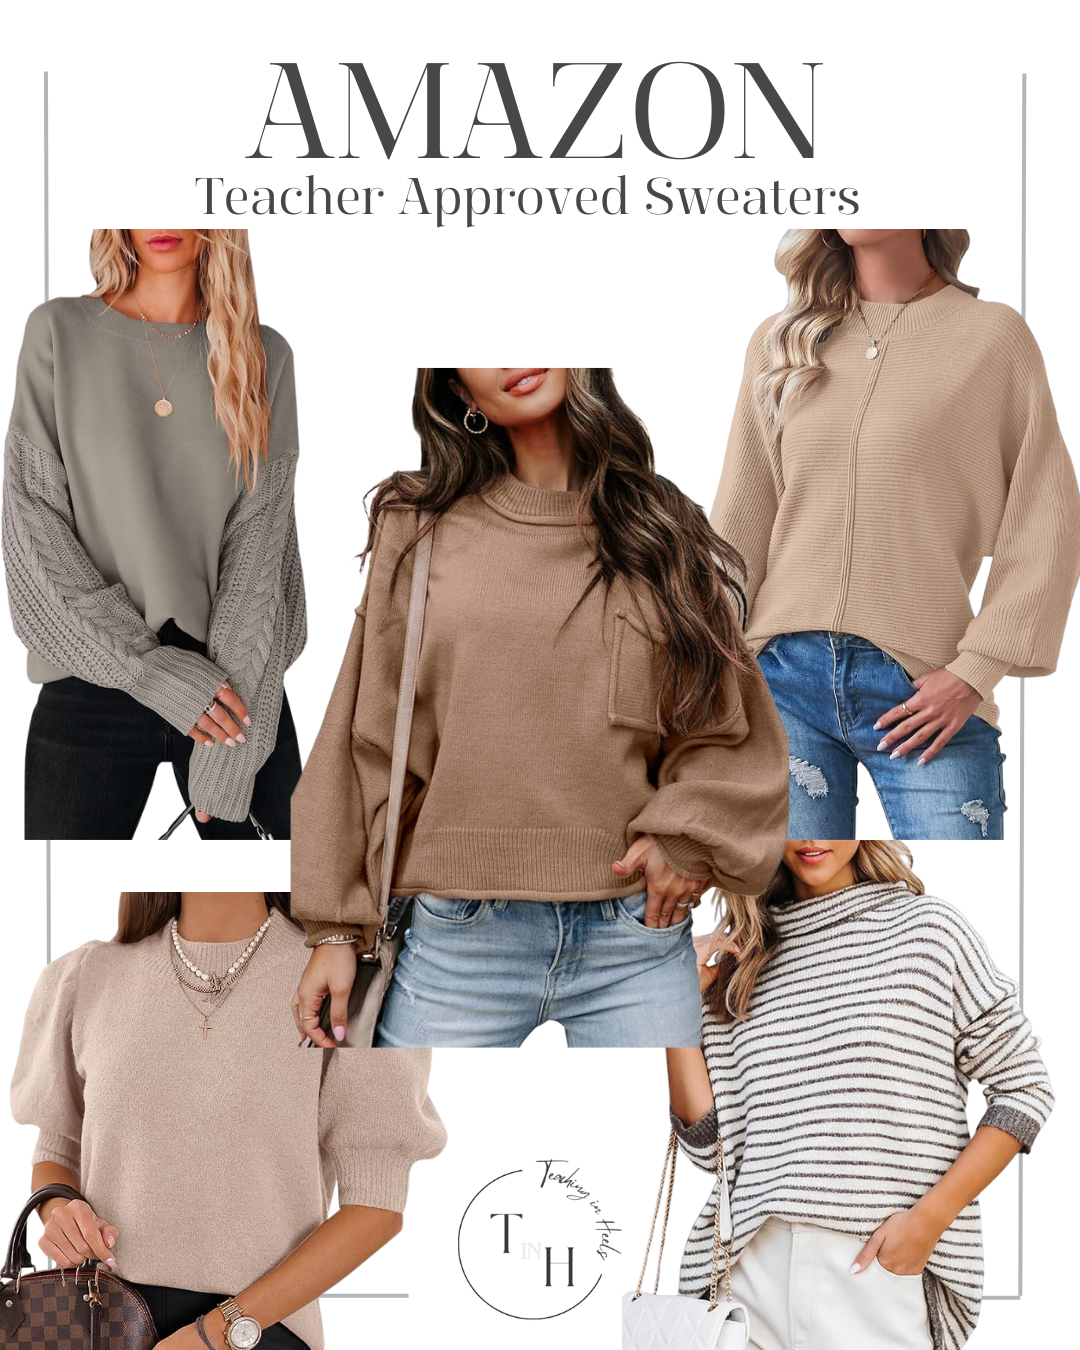 10 Teacher Approved Amazon Sweaters for Fall #fall #amazon #sweaters #style #teacher #favorites #cold #fall #winter #stripes #boots #jeans #pants 